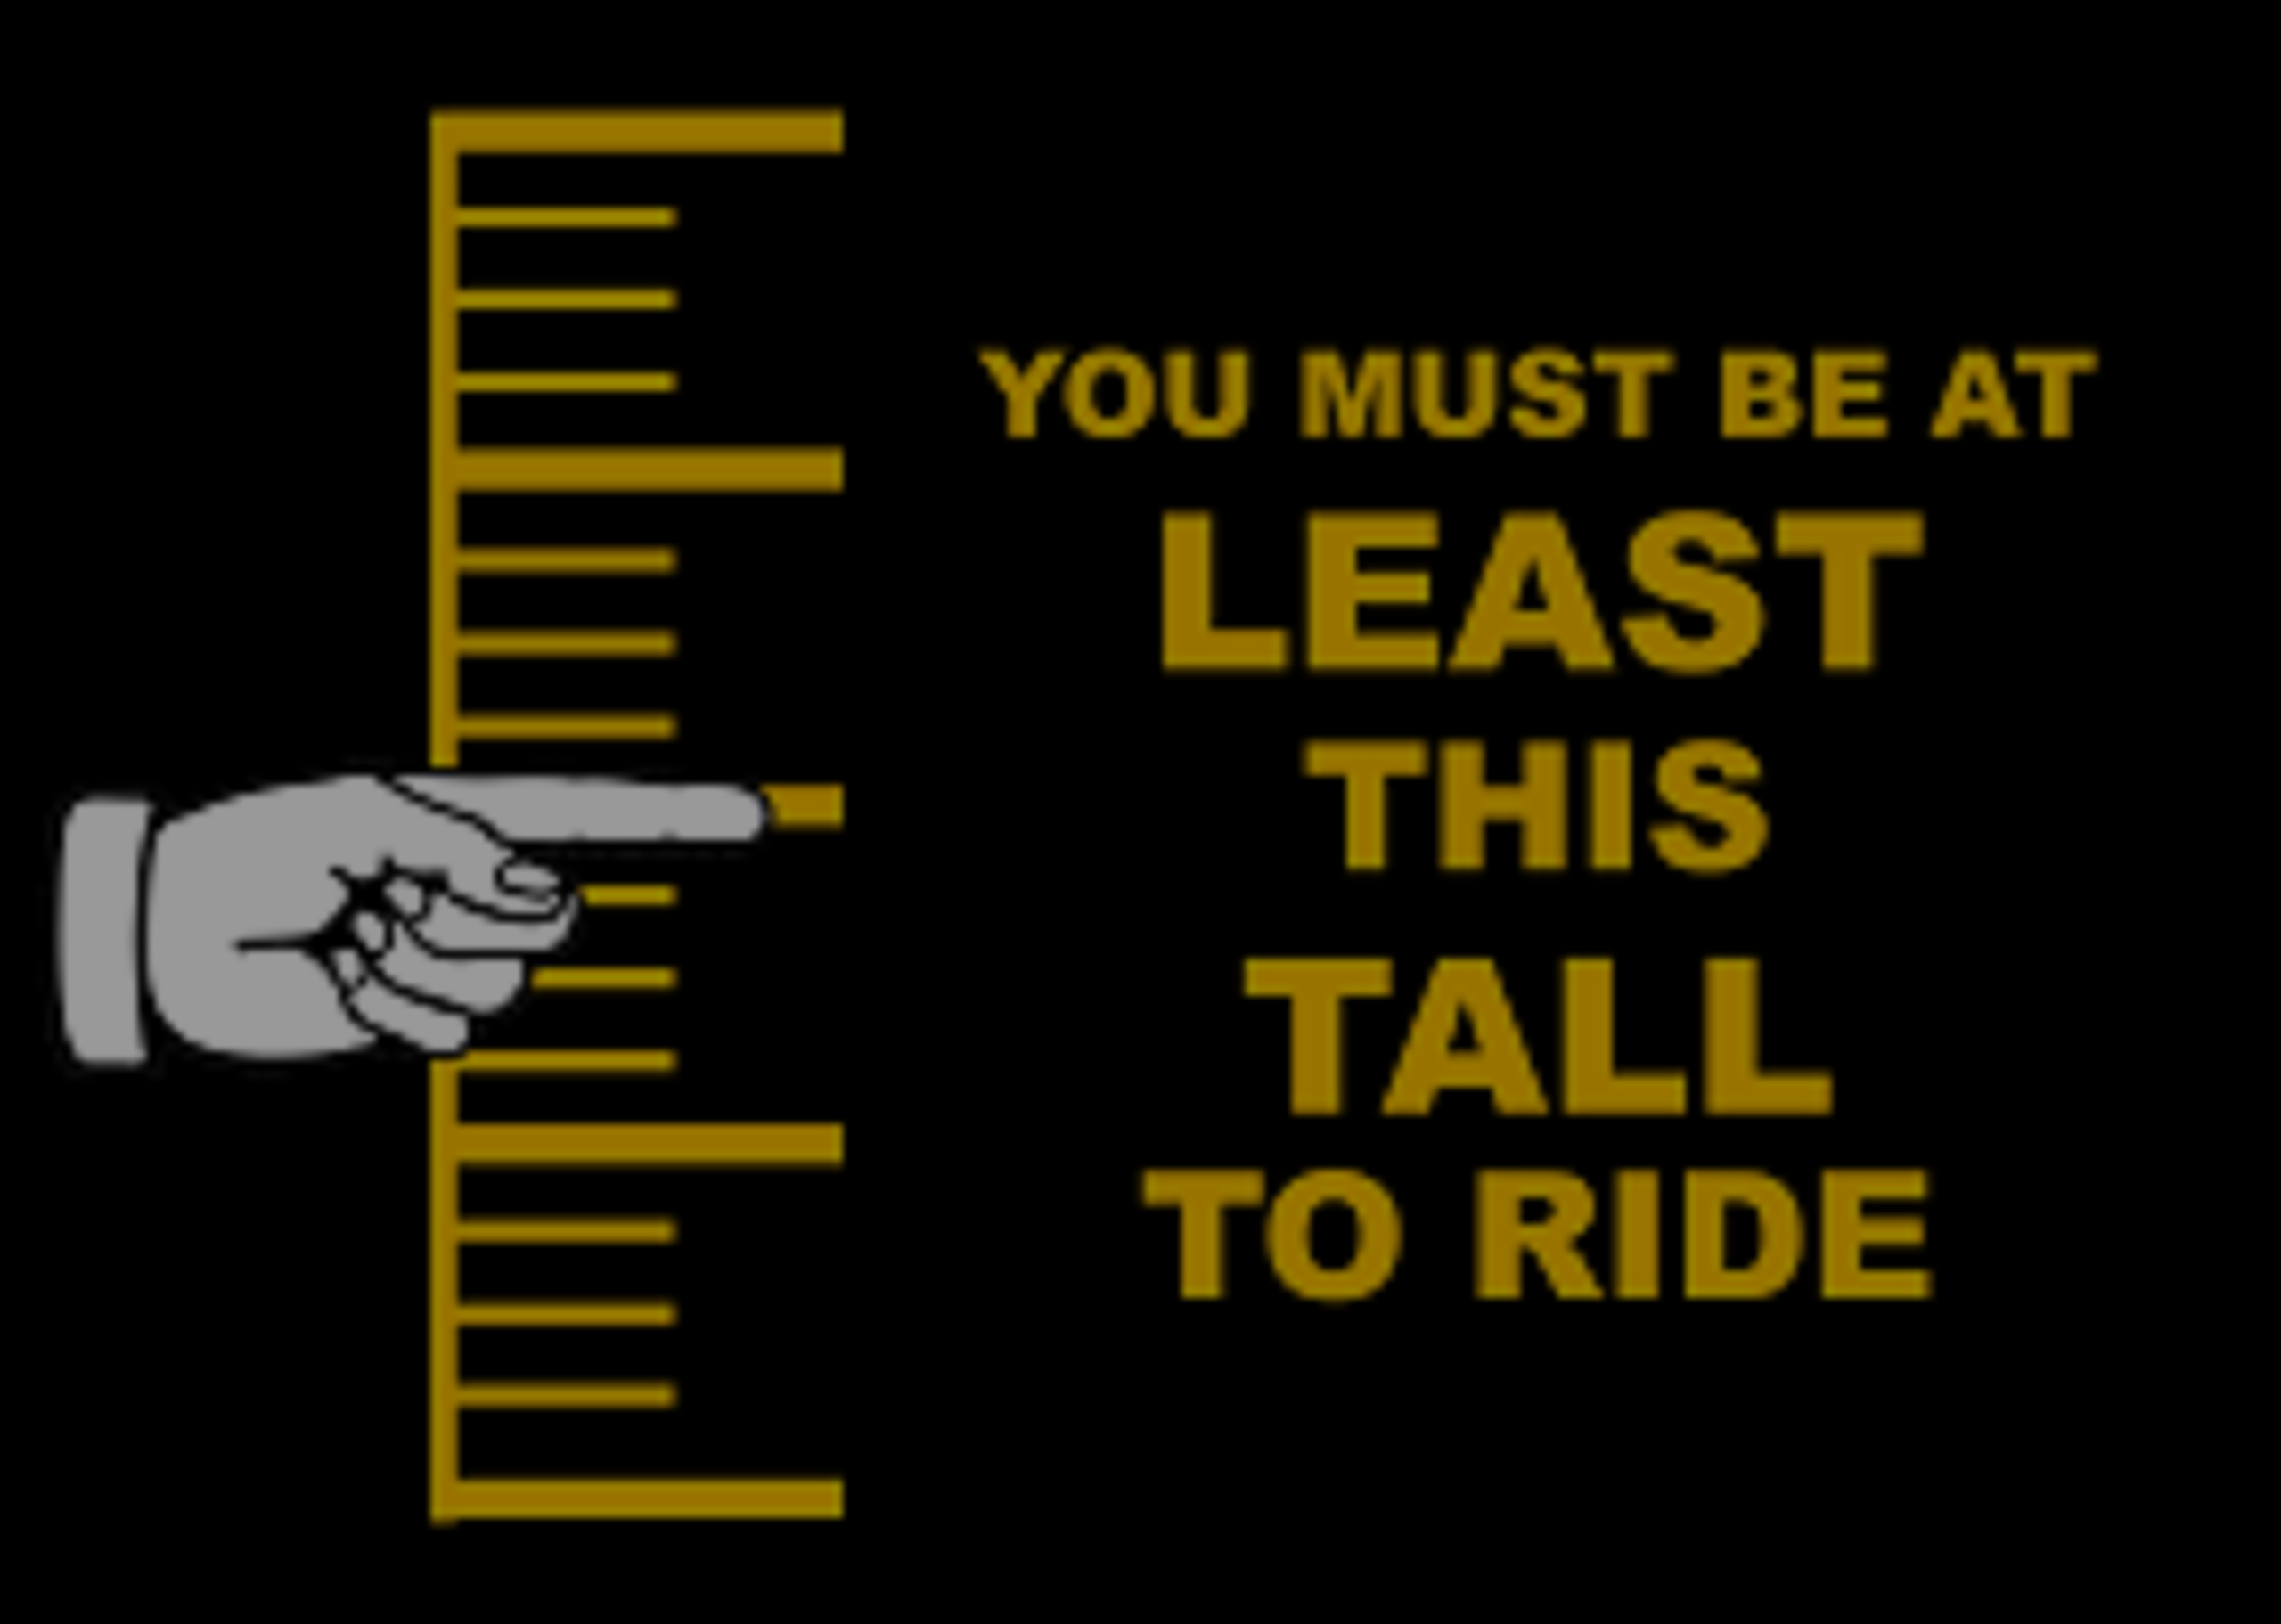 Must be waiting. Must be this Tall to Ride. You must be this Tall to. Height limit знак. Must be.